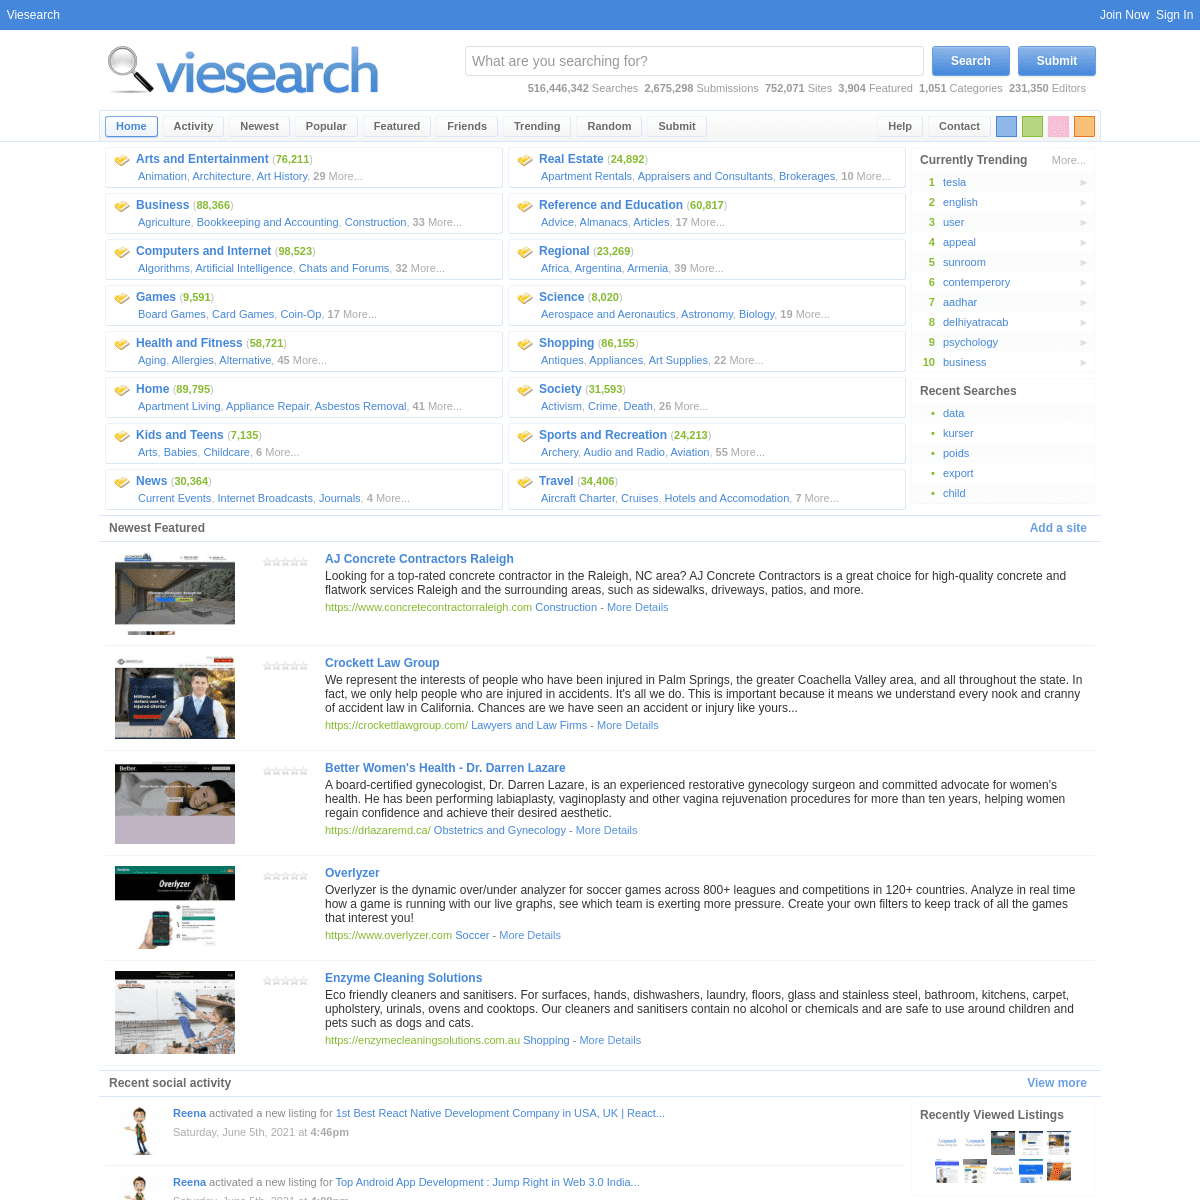 A complete backup of https://viesearch.com